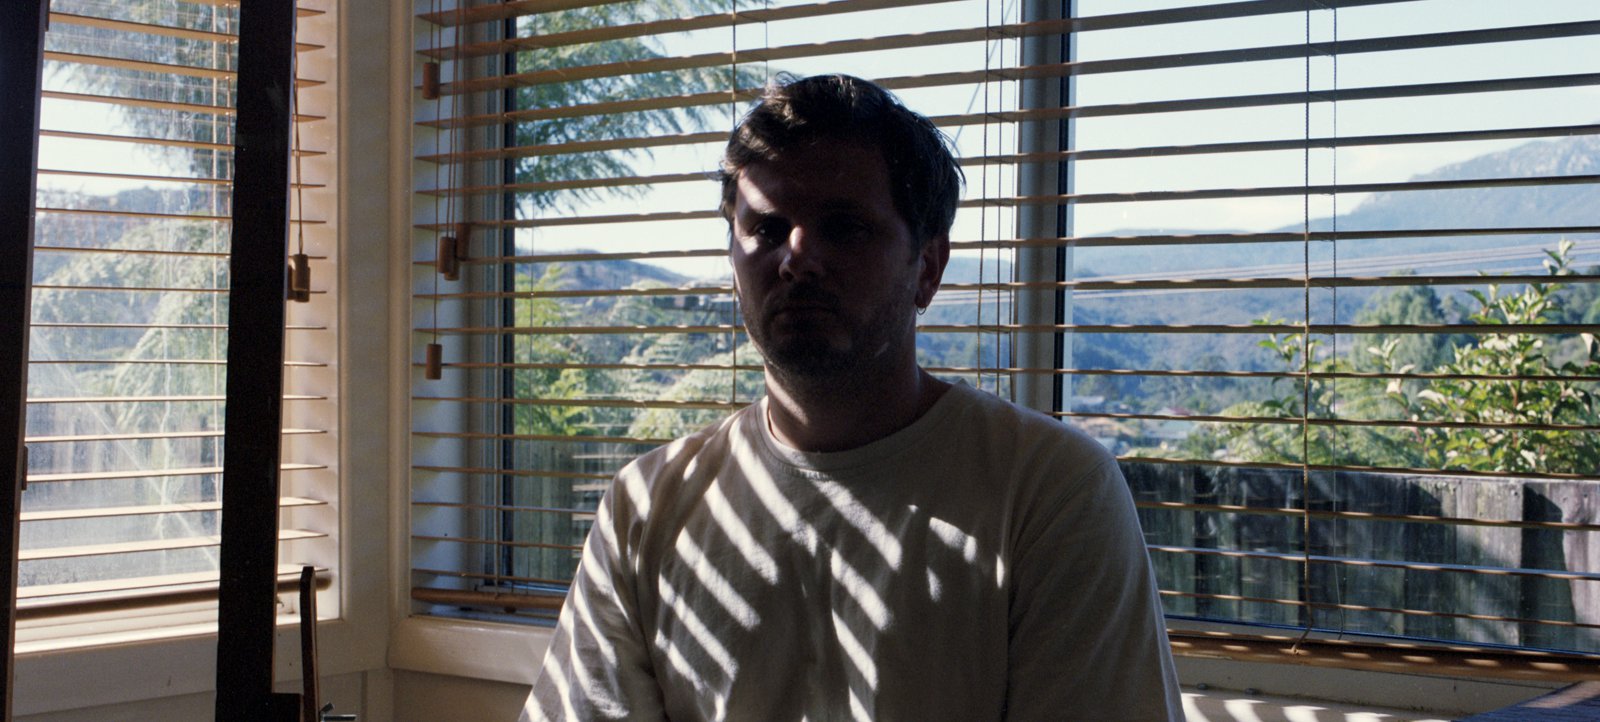 A photo of Carl Ross sitting on a wooden chair in a sunny room. Carl's face is blocked by shade, he wears a white t-shirt and tan pants. Venetian blinds cover all windows and mark Carl and the surrounding room with diagonal stripes. Credit Noah Thompson.